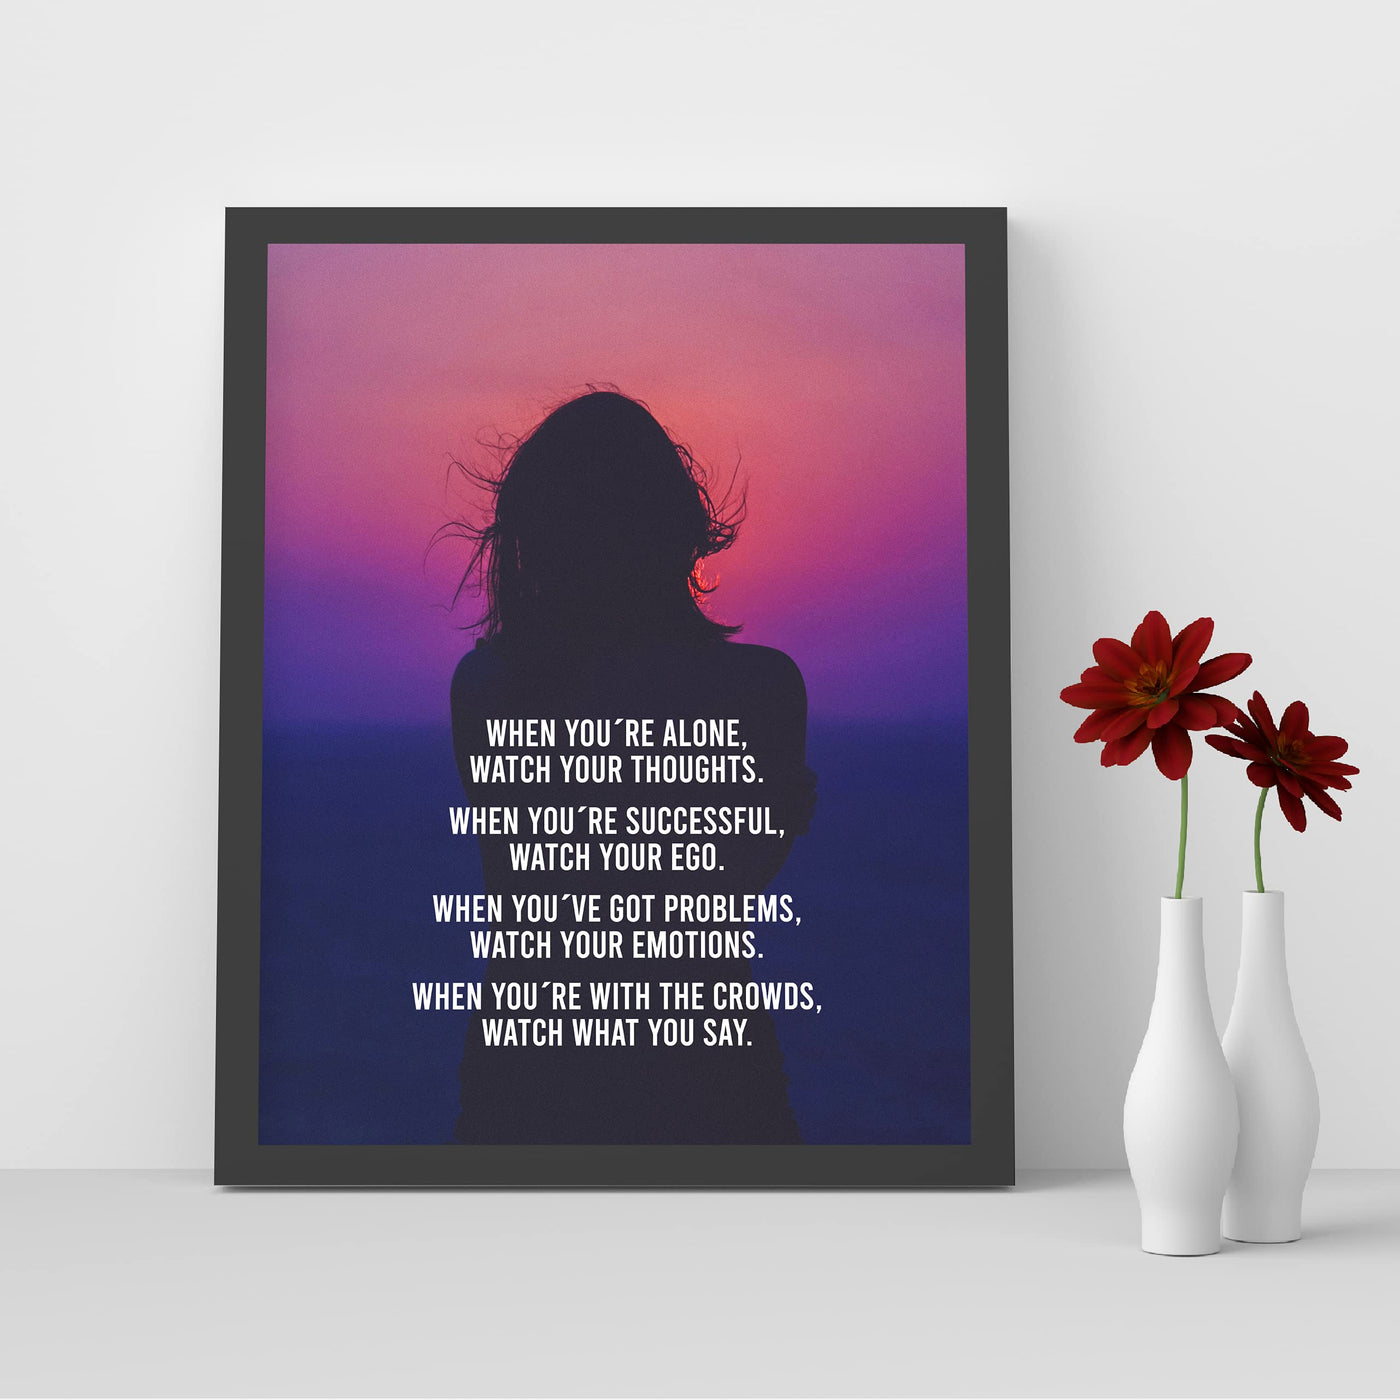 Watch Your Thoughts-Ego-Emotions-Inspirational Wall Art - 8 x 10" Typographic Sunset Print-Ready to Frame. Motivational Print for Home-Office-Studio-Dorm Decor. Great Reminders for Inspiration!